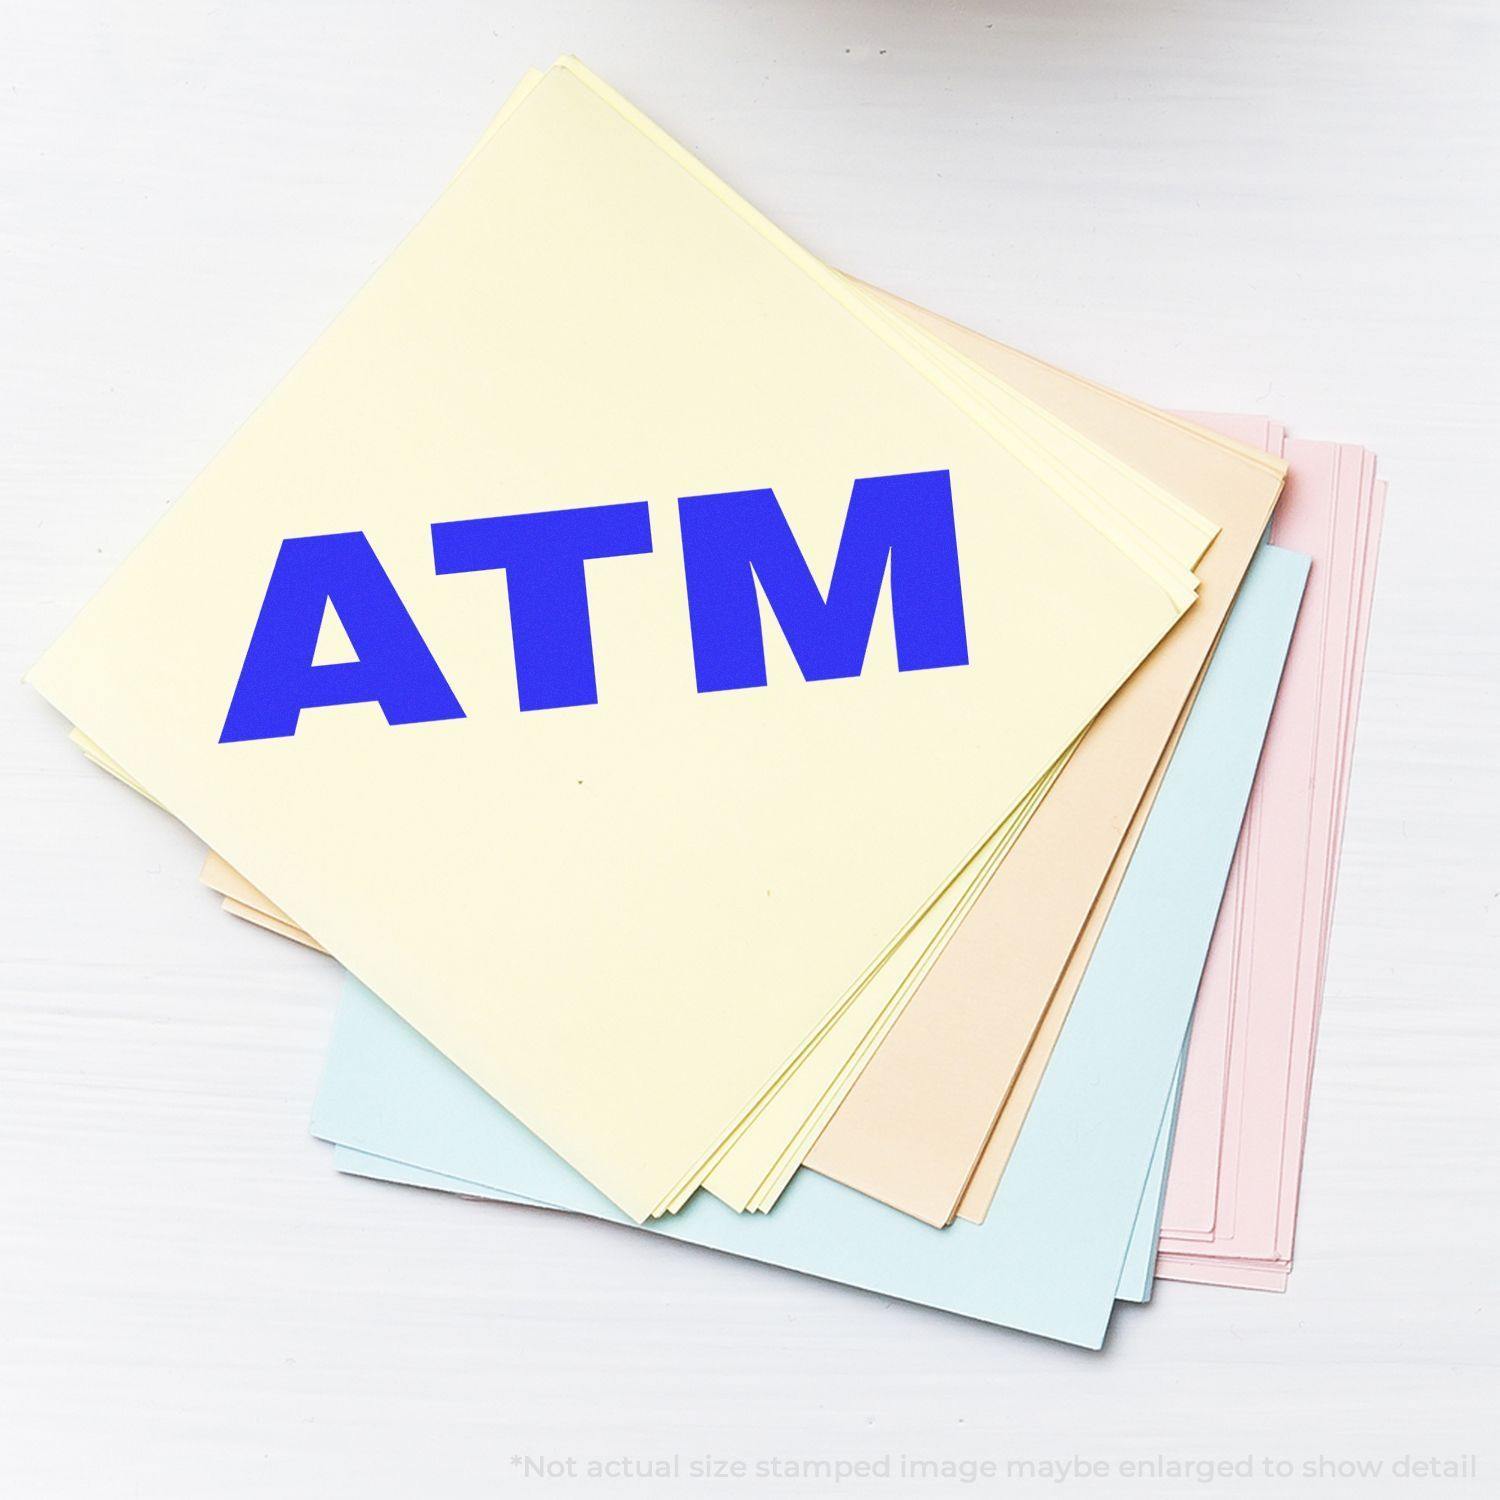 A stock office rubber stamp with a stamped image showing how the text "ATM" is displayed after stamping.